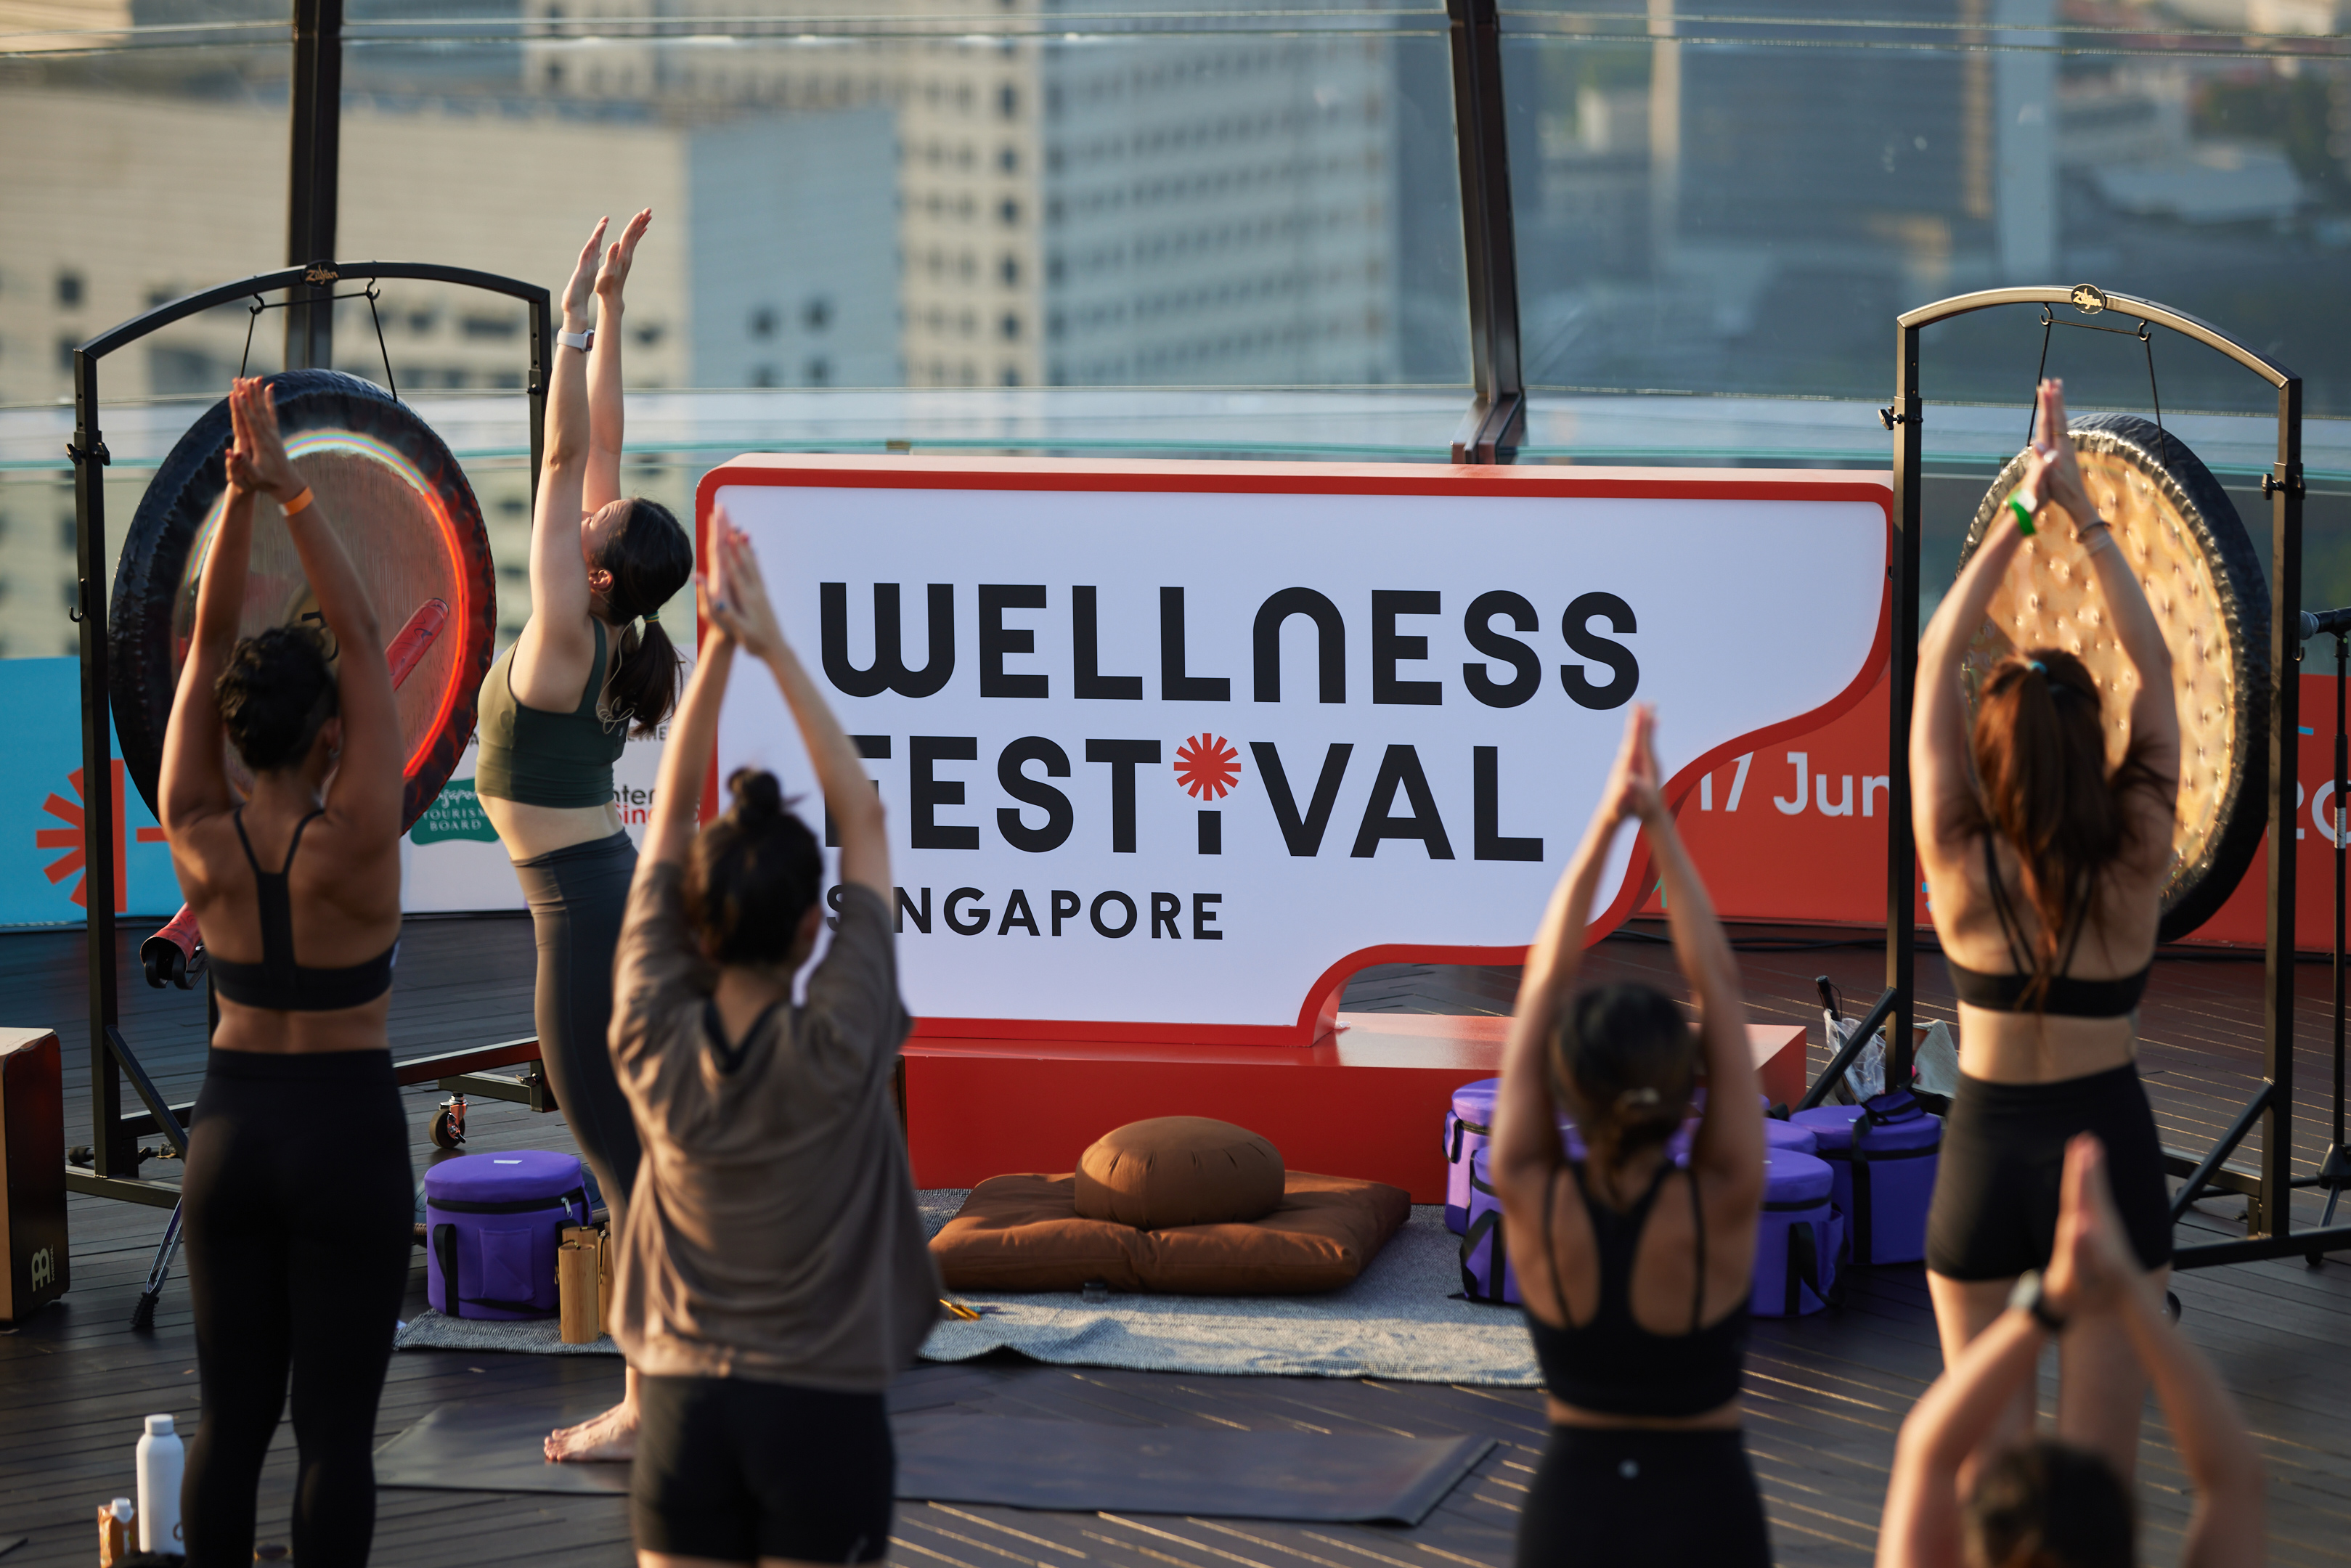 Join in a scenic rooftop yoga session at the MBS Event Plaza.
